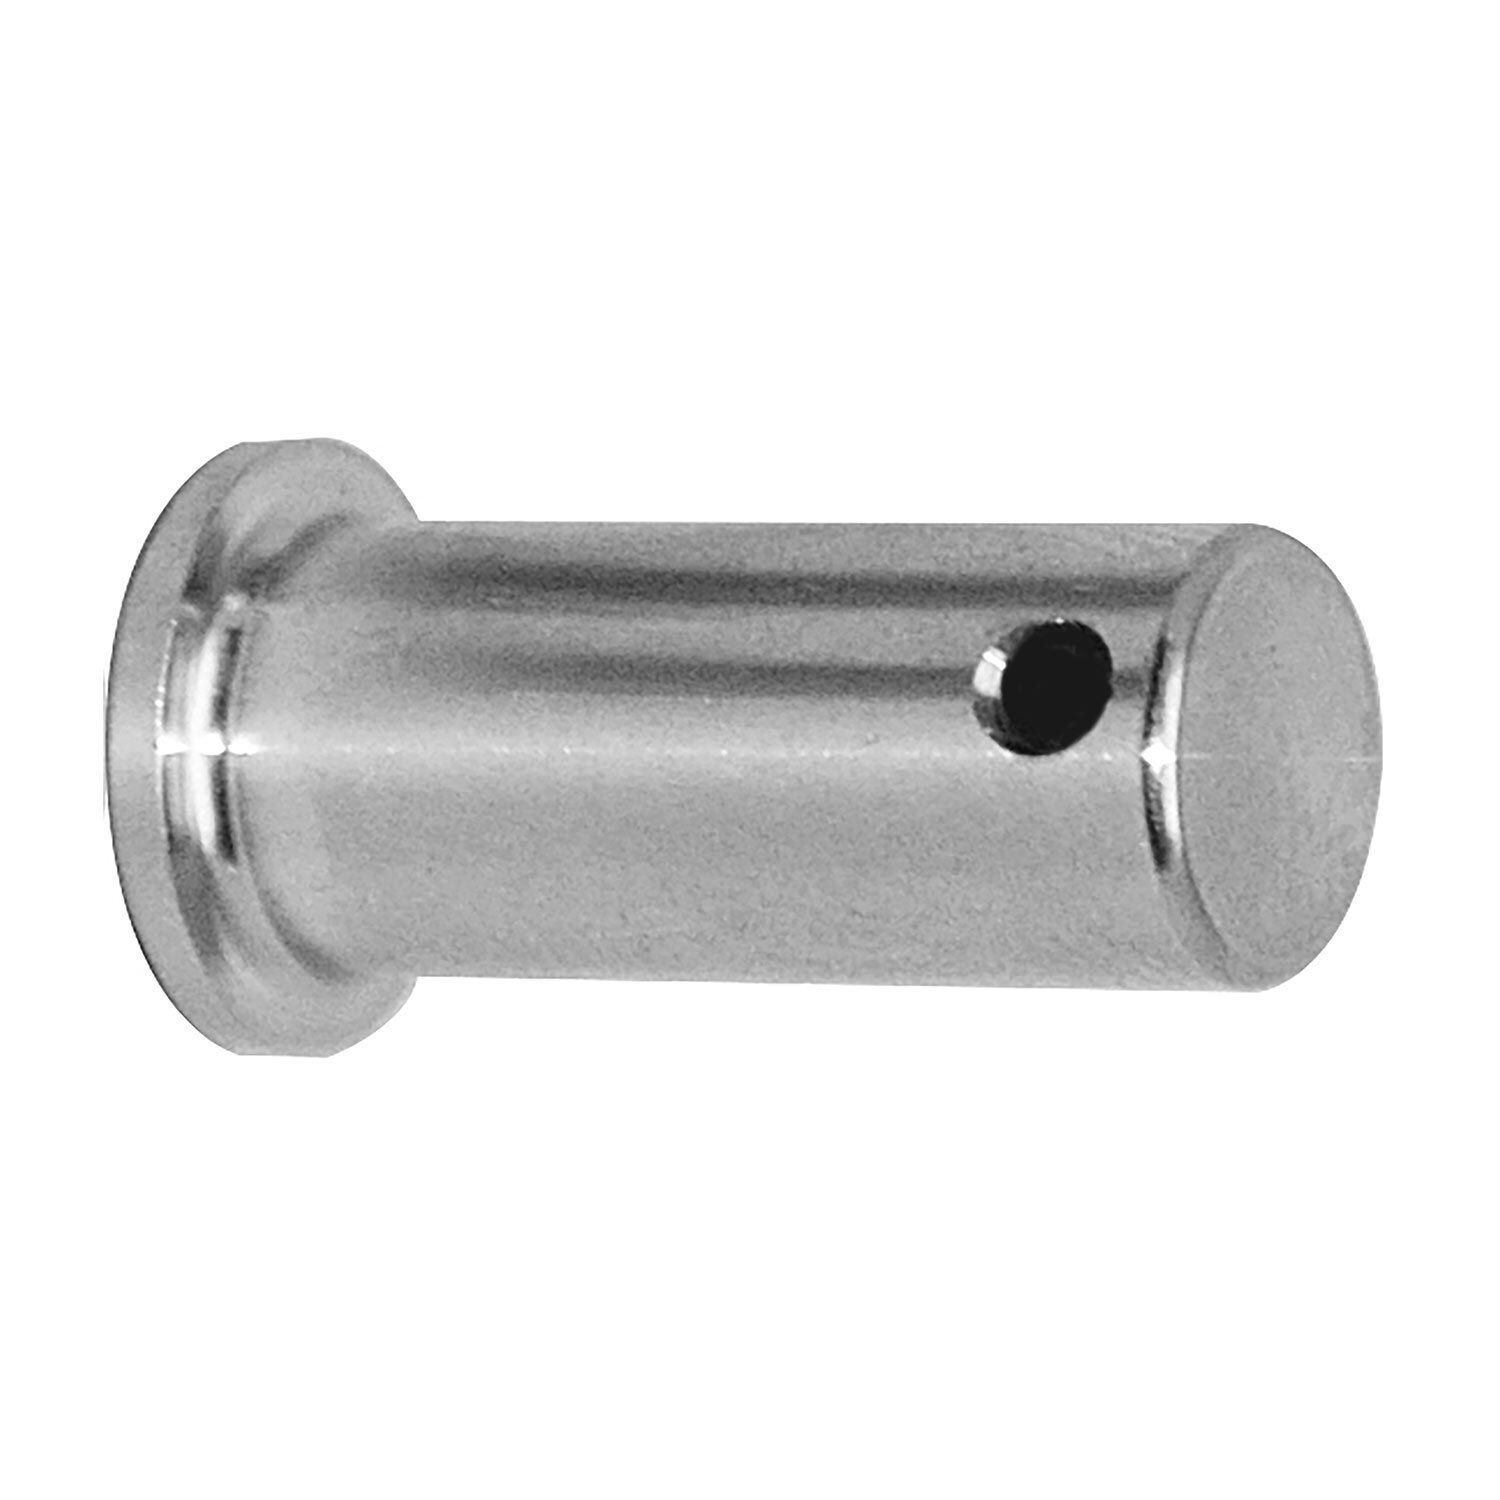 3/8" x 2 " Stainless Steel Clevis Pins 1 WASHERS AND 0 COTTER PIN 